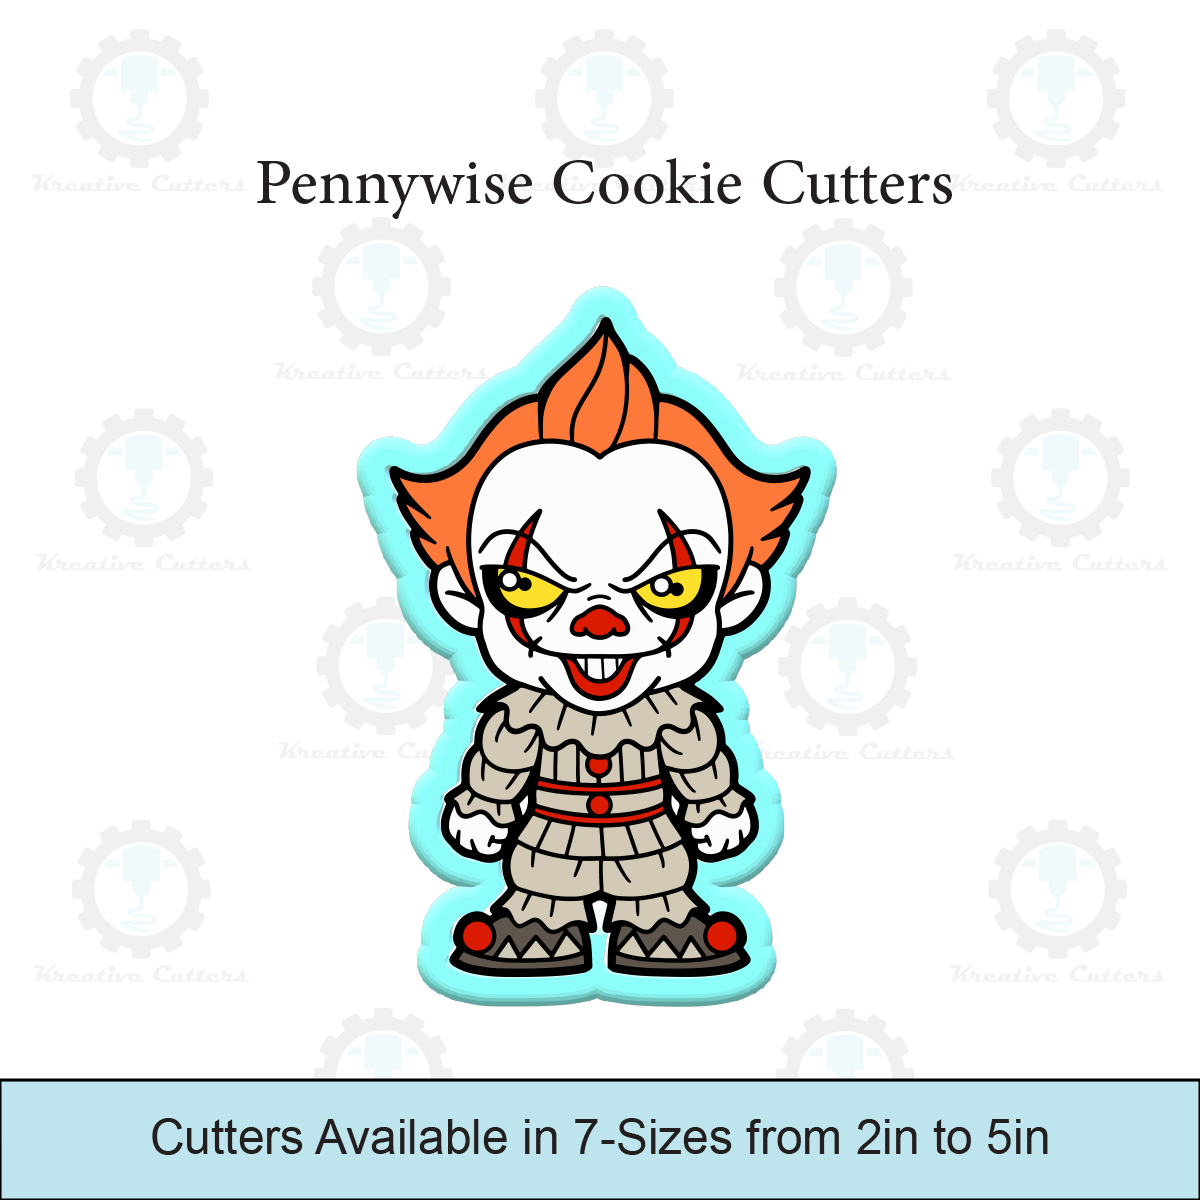 Pennywise Cookie Cutters